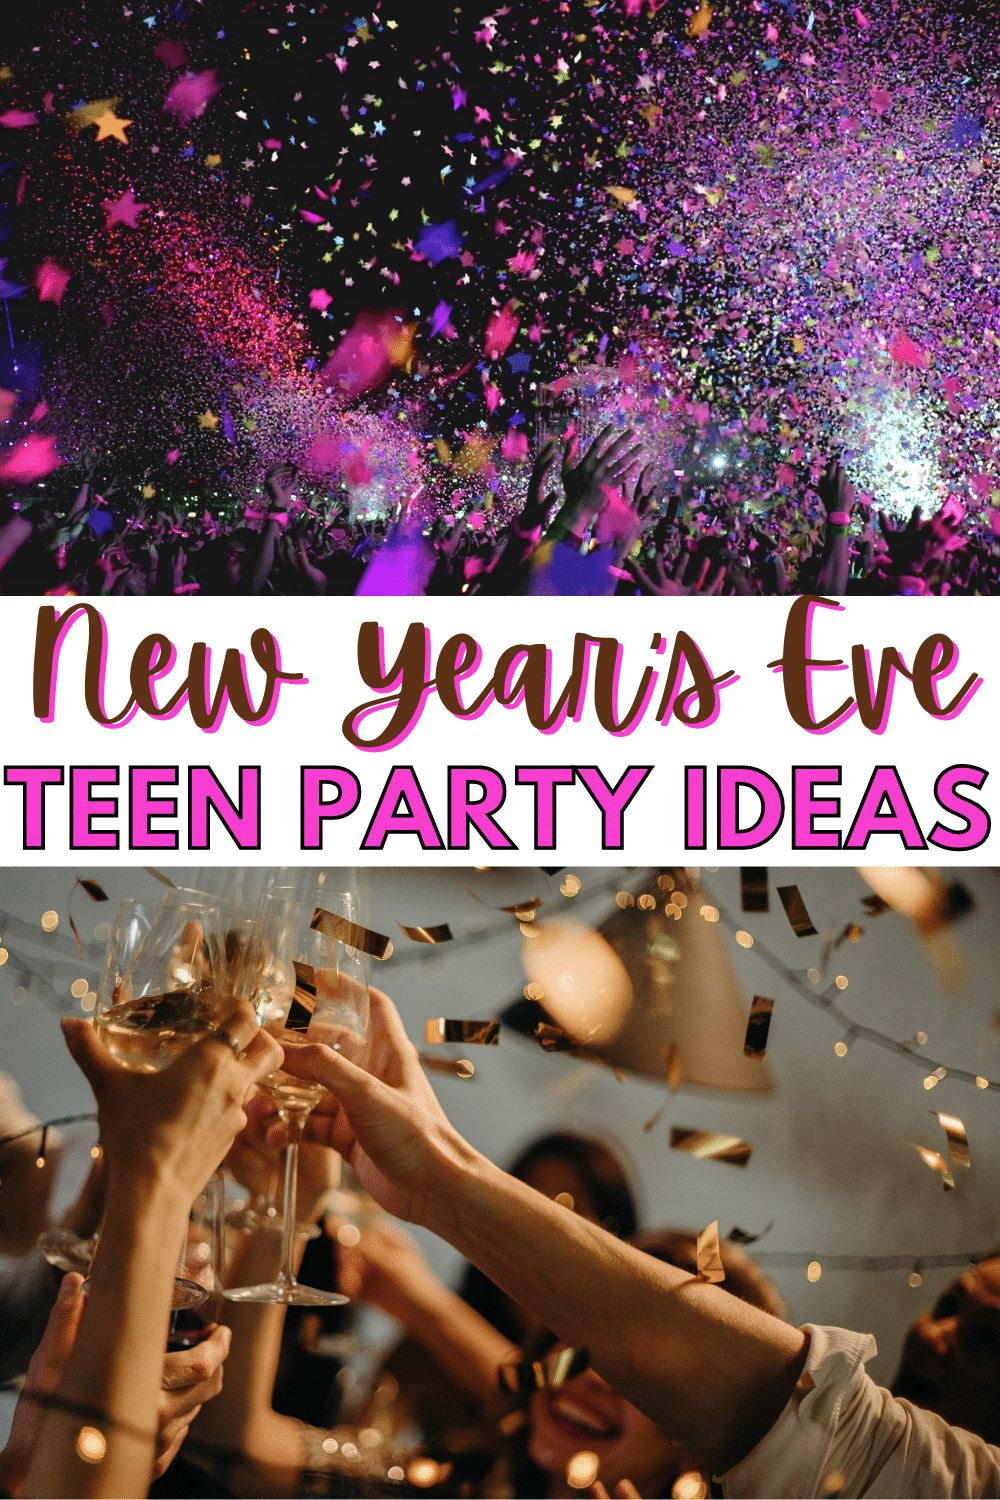 New Year’s Eve Party Ideas for Teens with a text title reading New Year's Eve teen party ideas